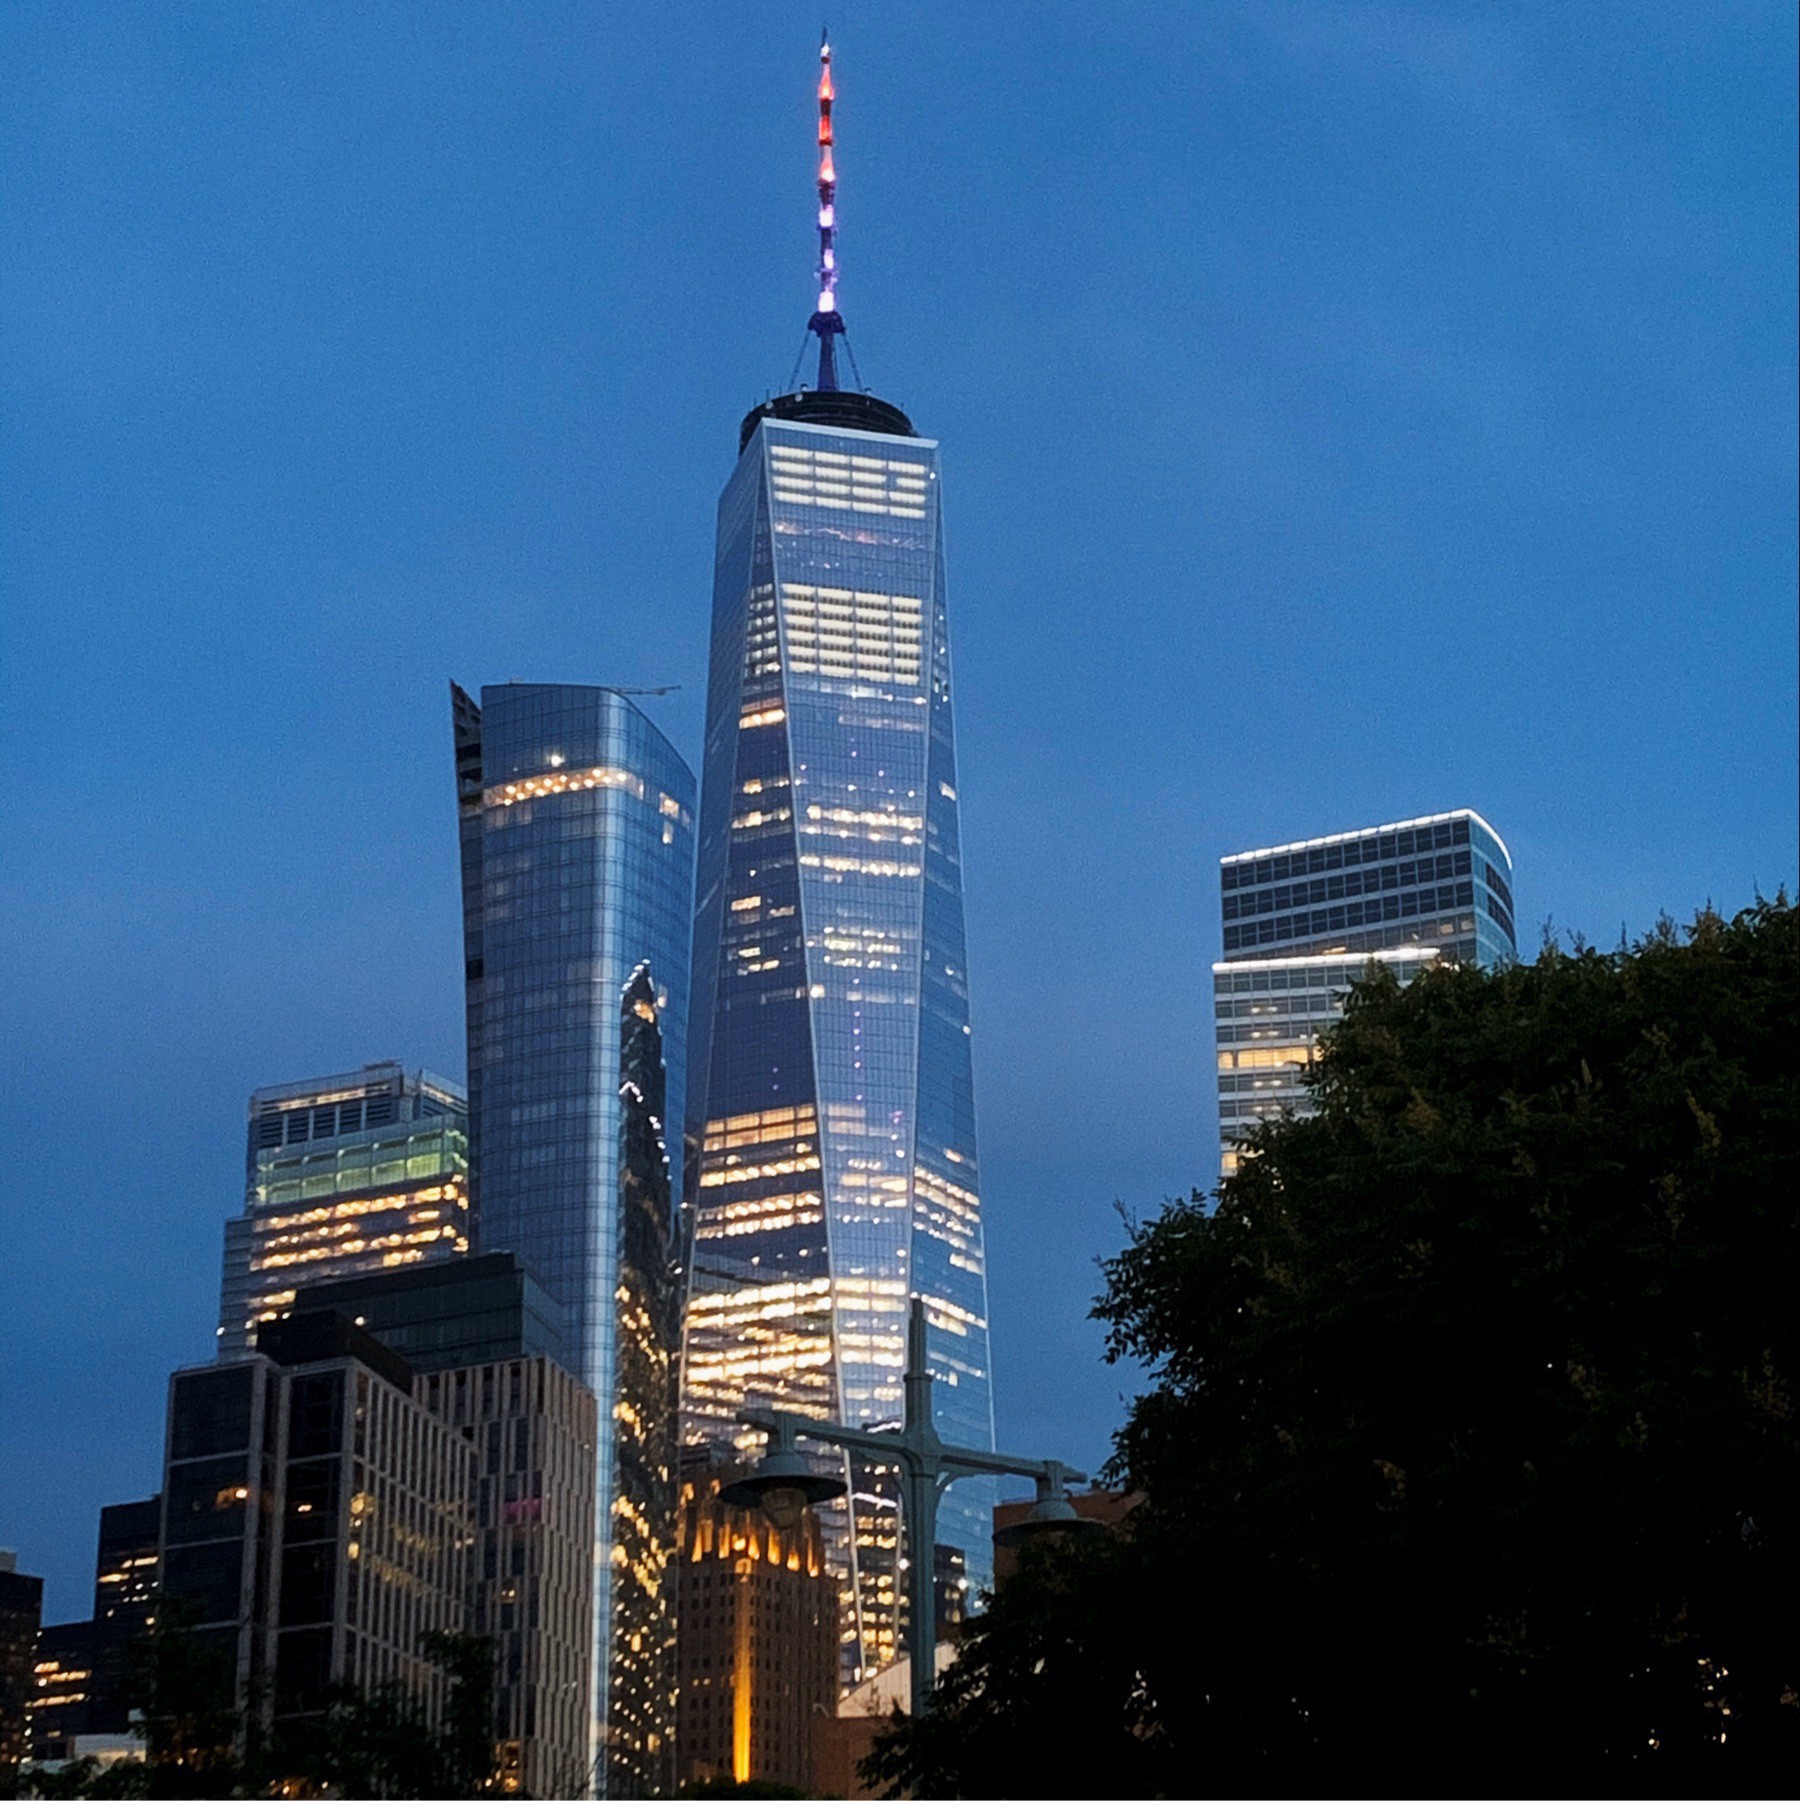 Evening view of One World Trade Center from north west.